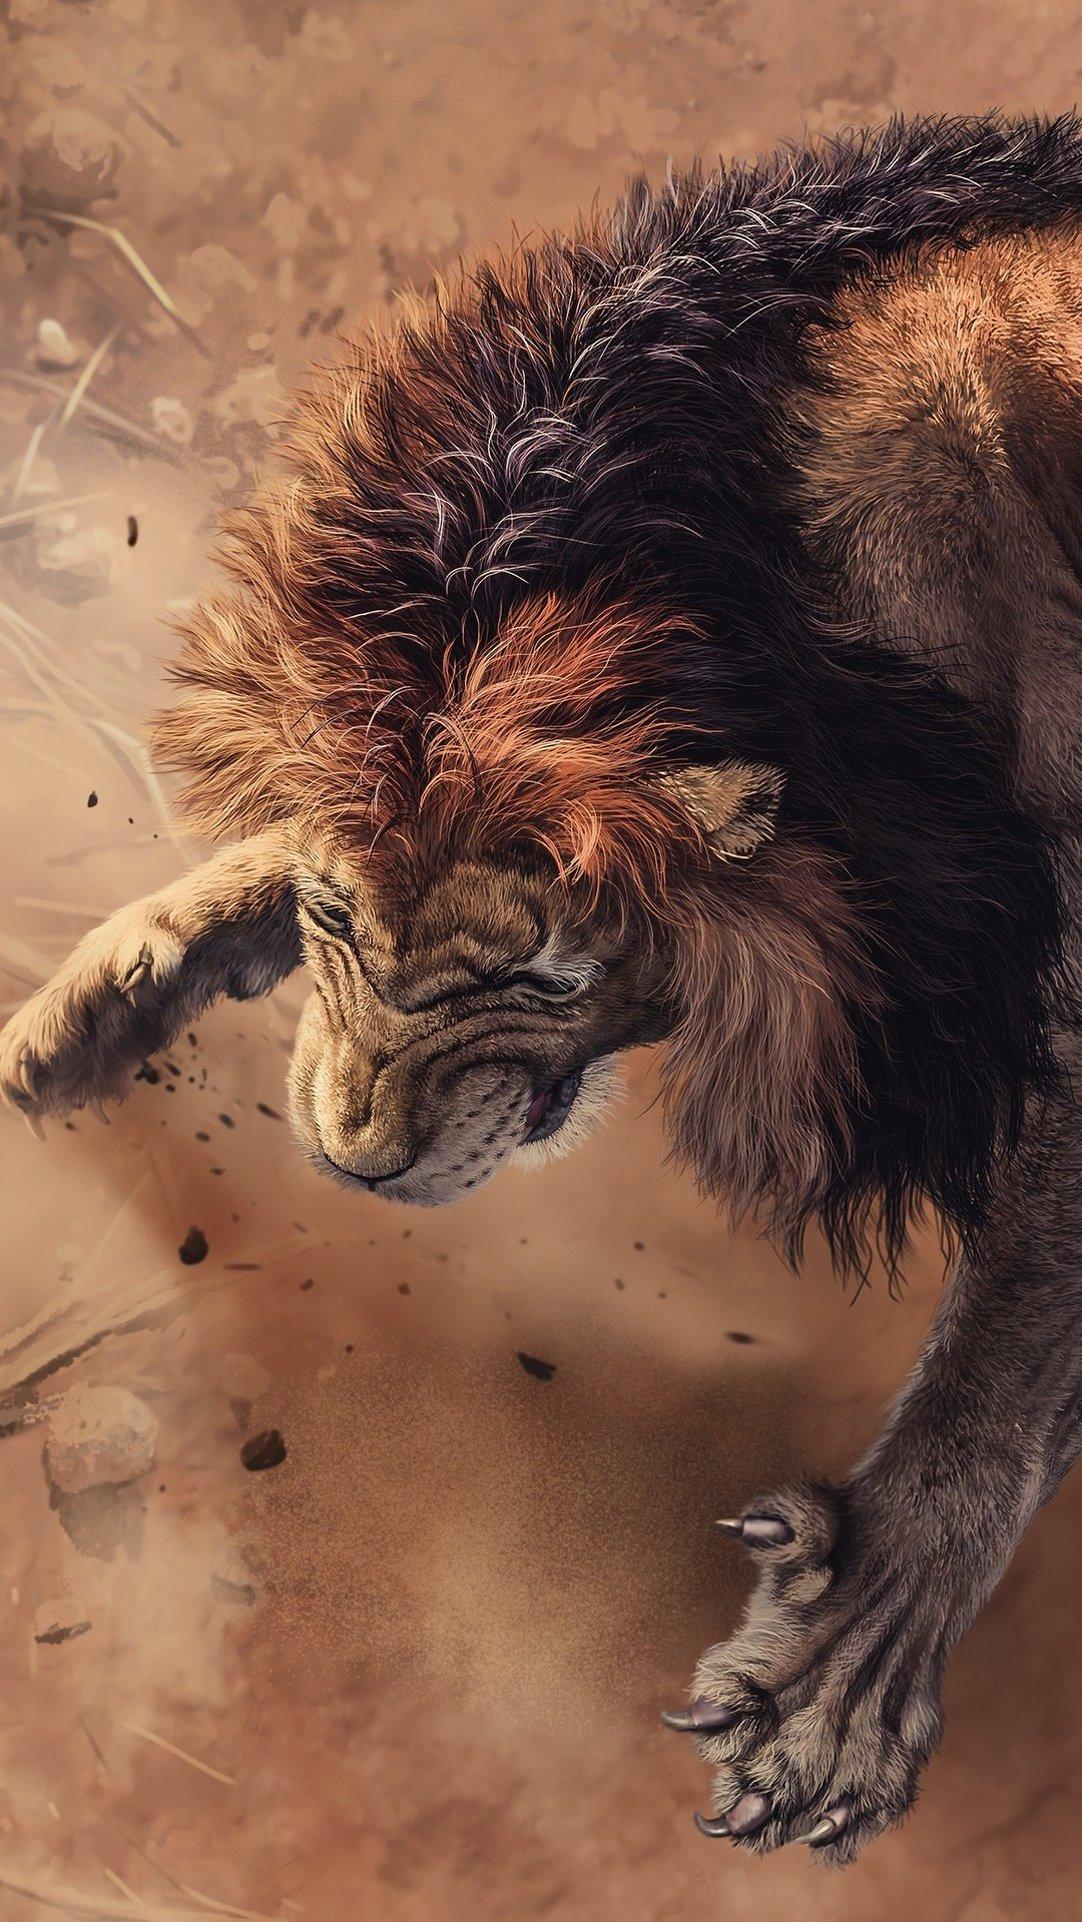 Angry Lion Wallpaper ID on Animals Wallpaper